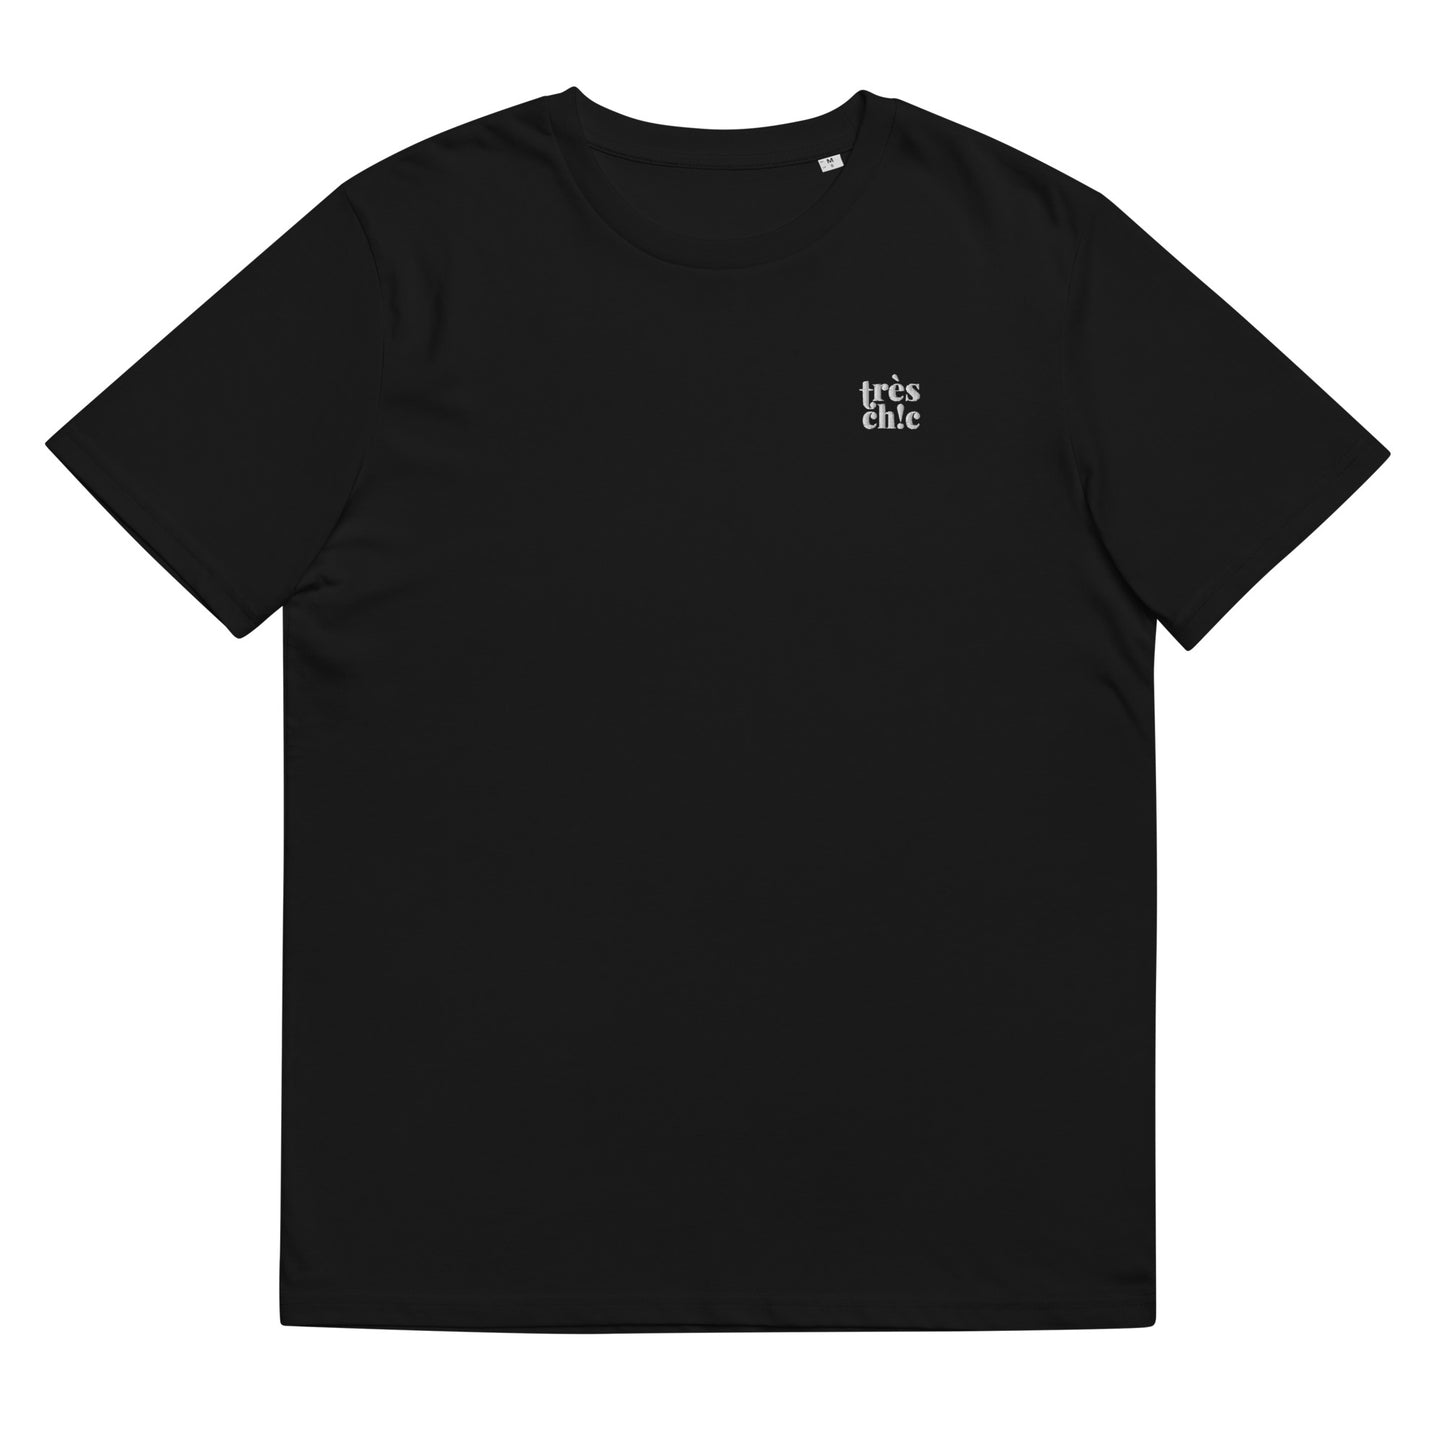 Fitted black organic cotton t-shirt with a small embroidery - "très chic" on the left chest. Available in sizes S to 3XL.